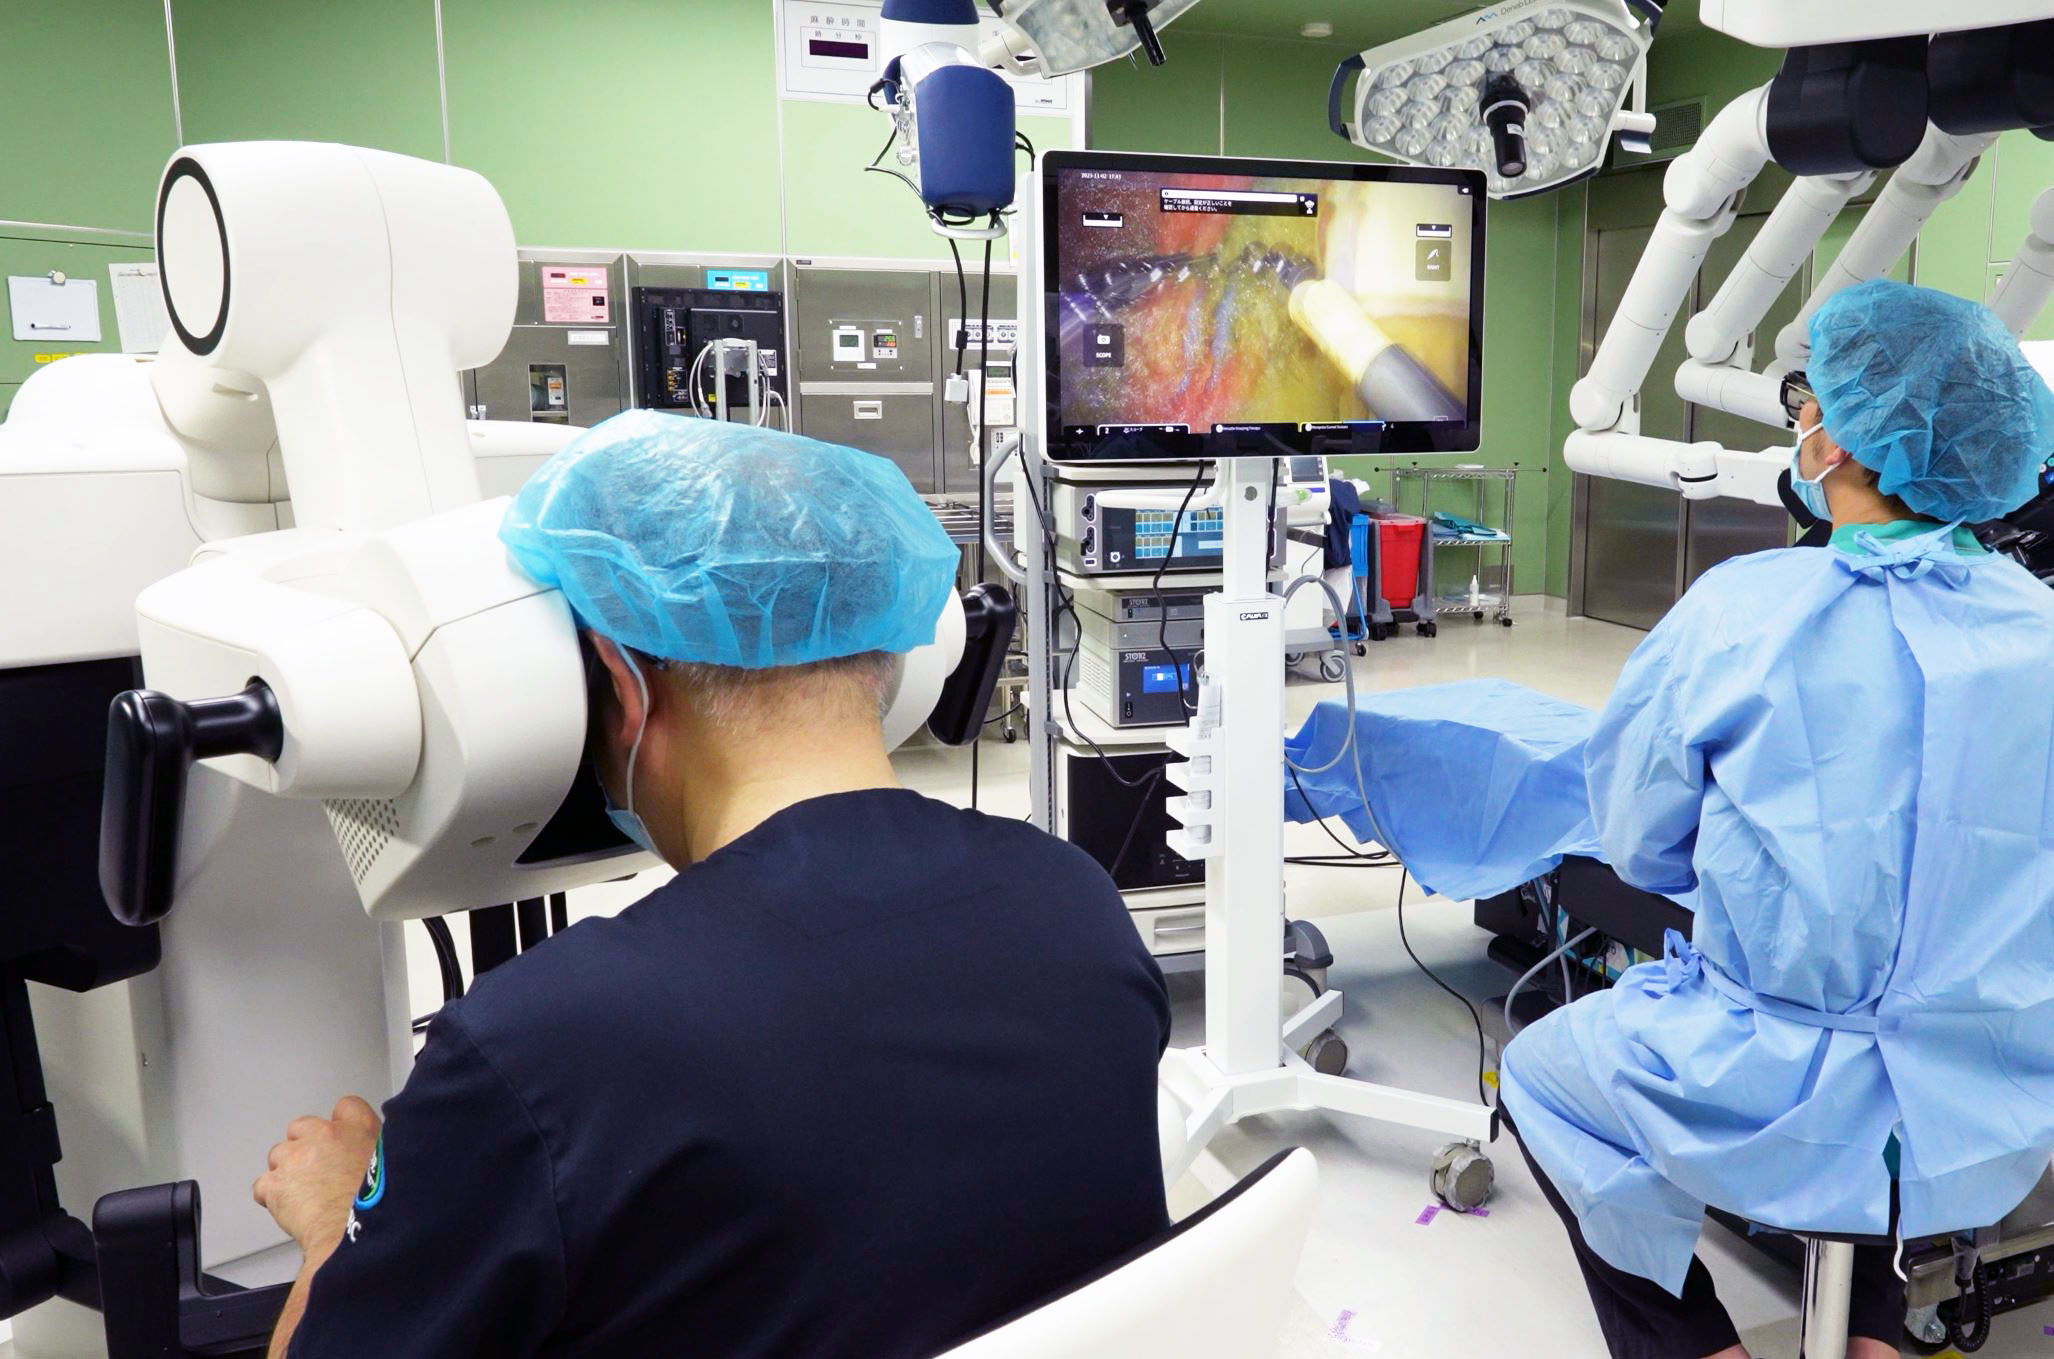 AUO Display Plus “SurgiEyes – Robotic Surgery Real-Time 3D Solution” enables the surgical view seen by the operating surgeon to be converted into a stereoscopic image for the entire medical team in the operating room, significantly enhancing communication efficiency and surgical safety